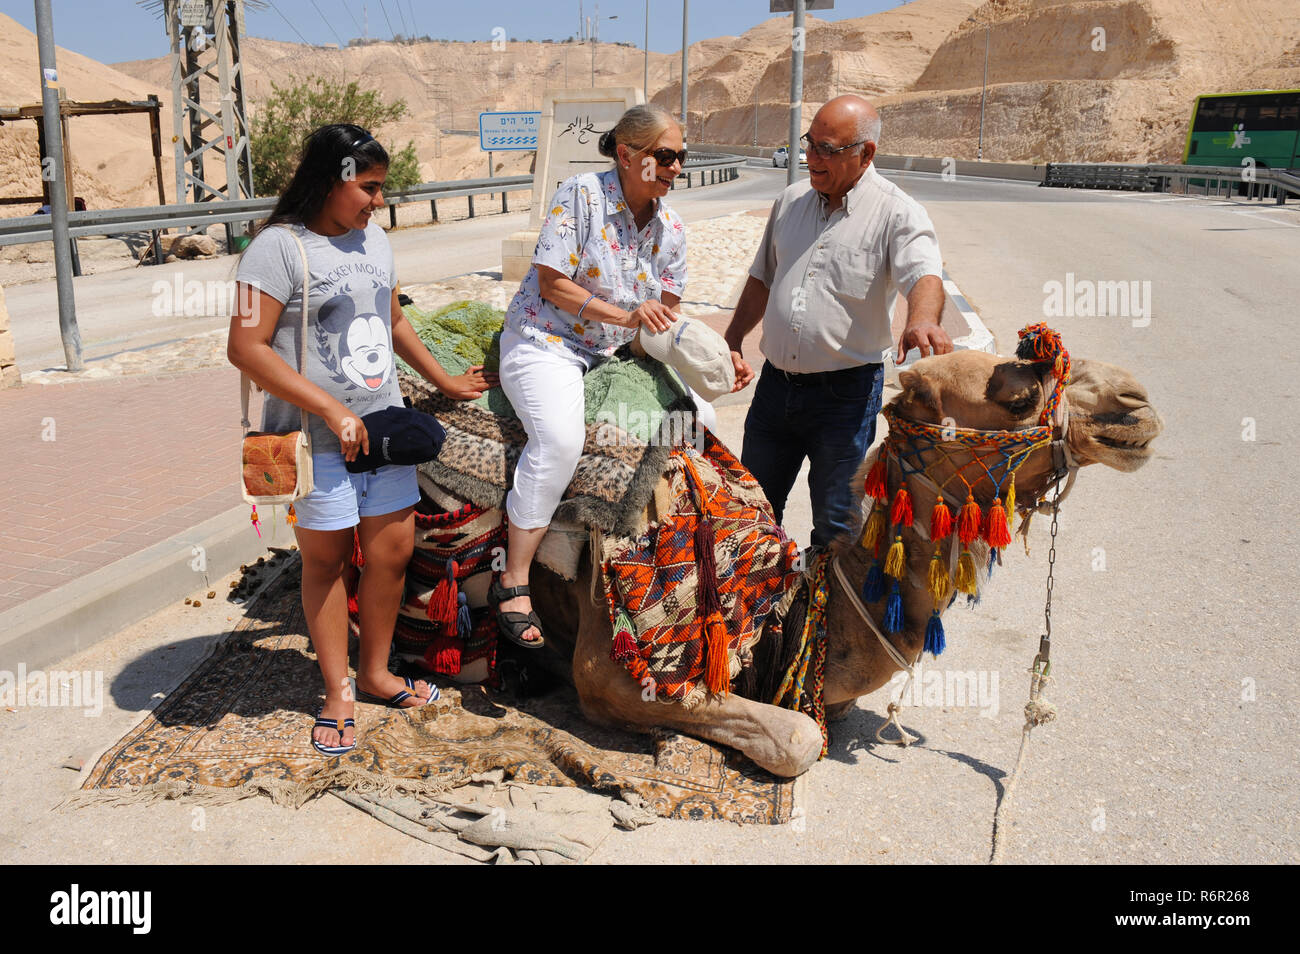 Female tourist being helped to mount a camel for entertainment ride on Israel Highway 90 at junction to Qaser El Yahud  in barren part of country, Stock Photo